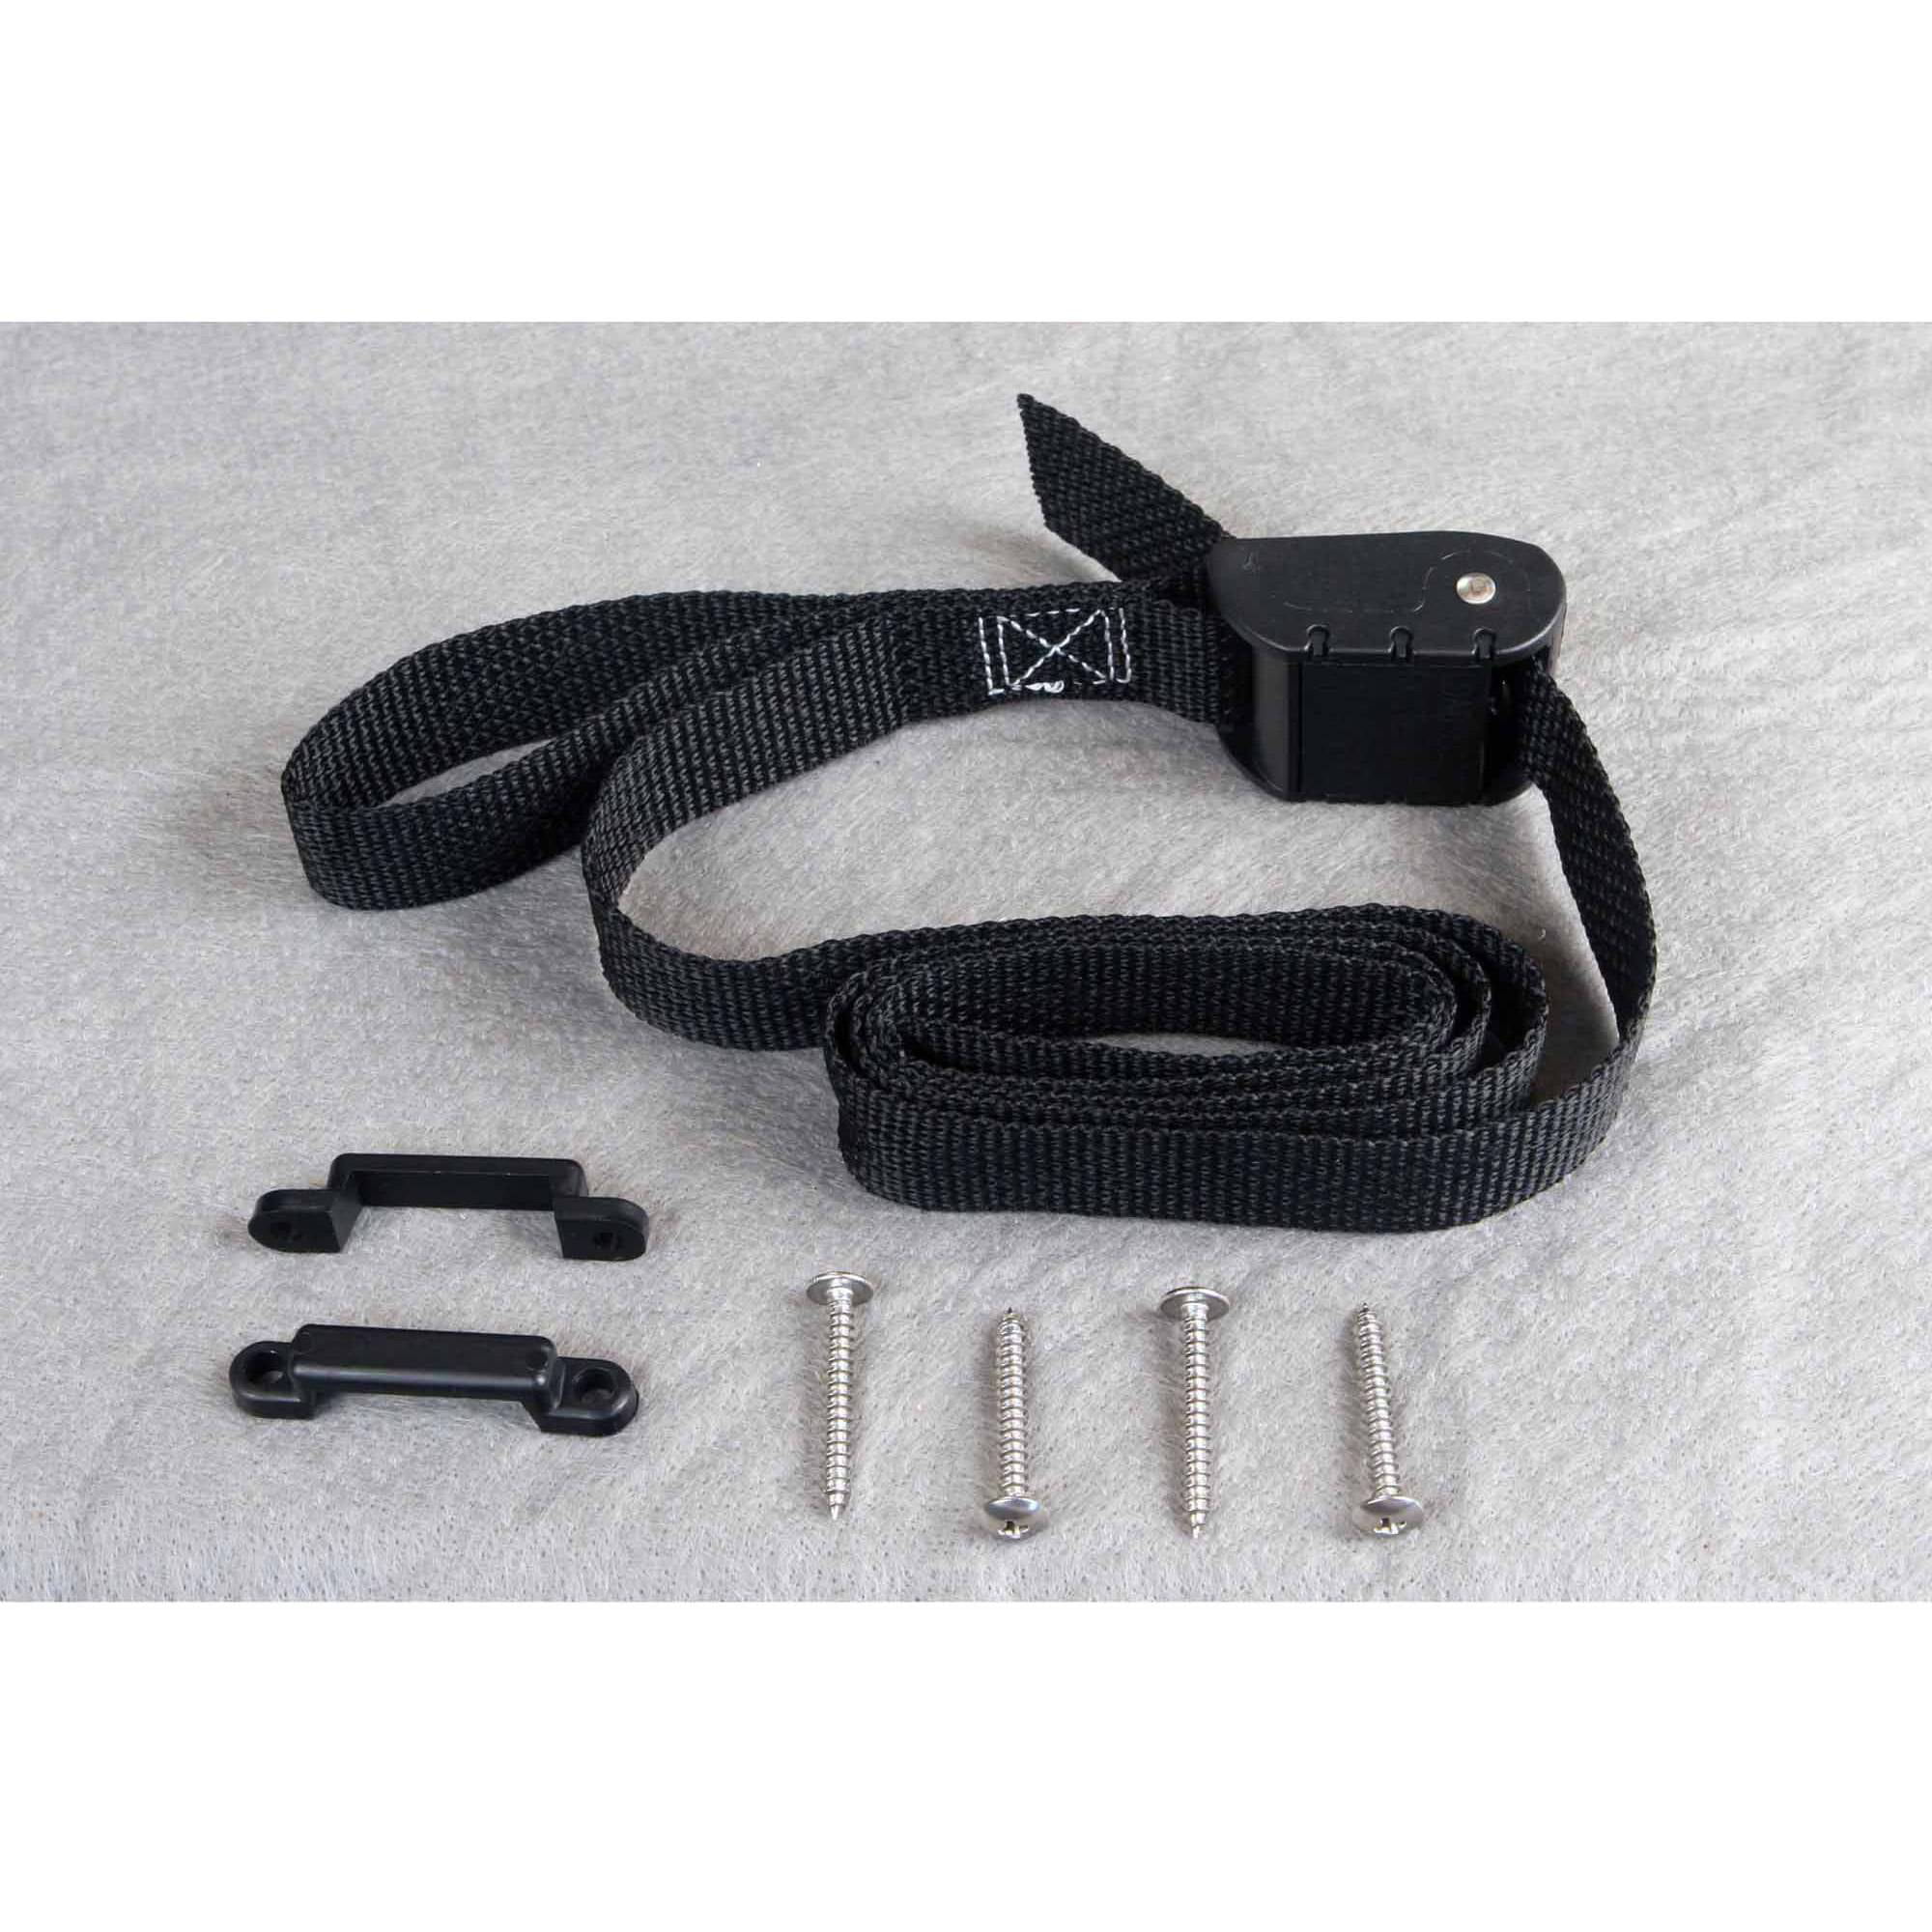 Military Vehicle Rubber Tie-Down Strap 12298148-1 Hook Battery Box Cover  Pair 